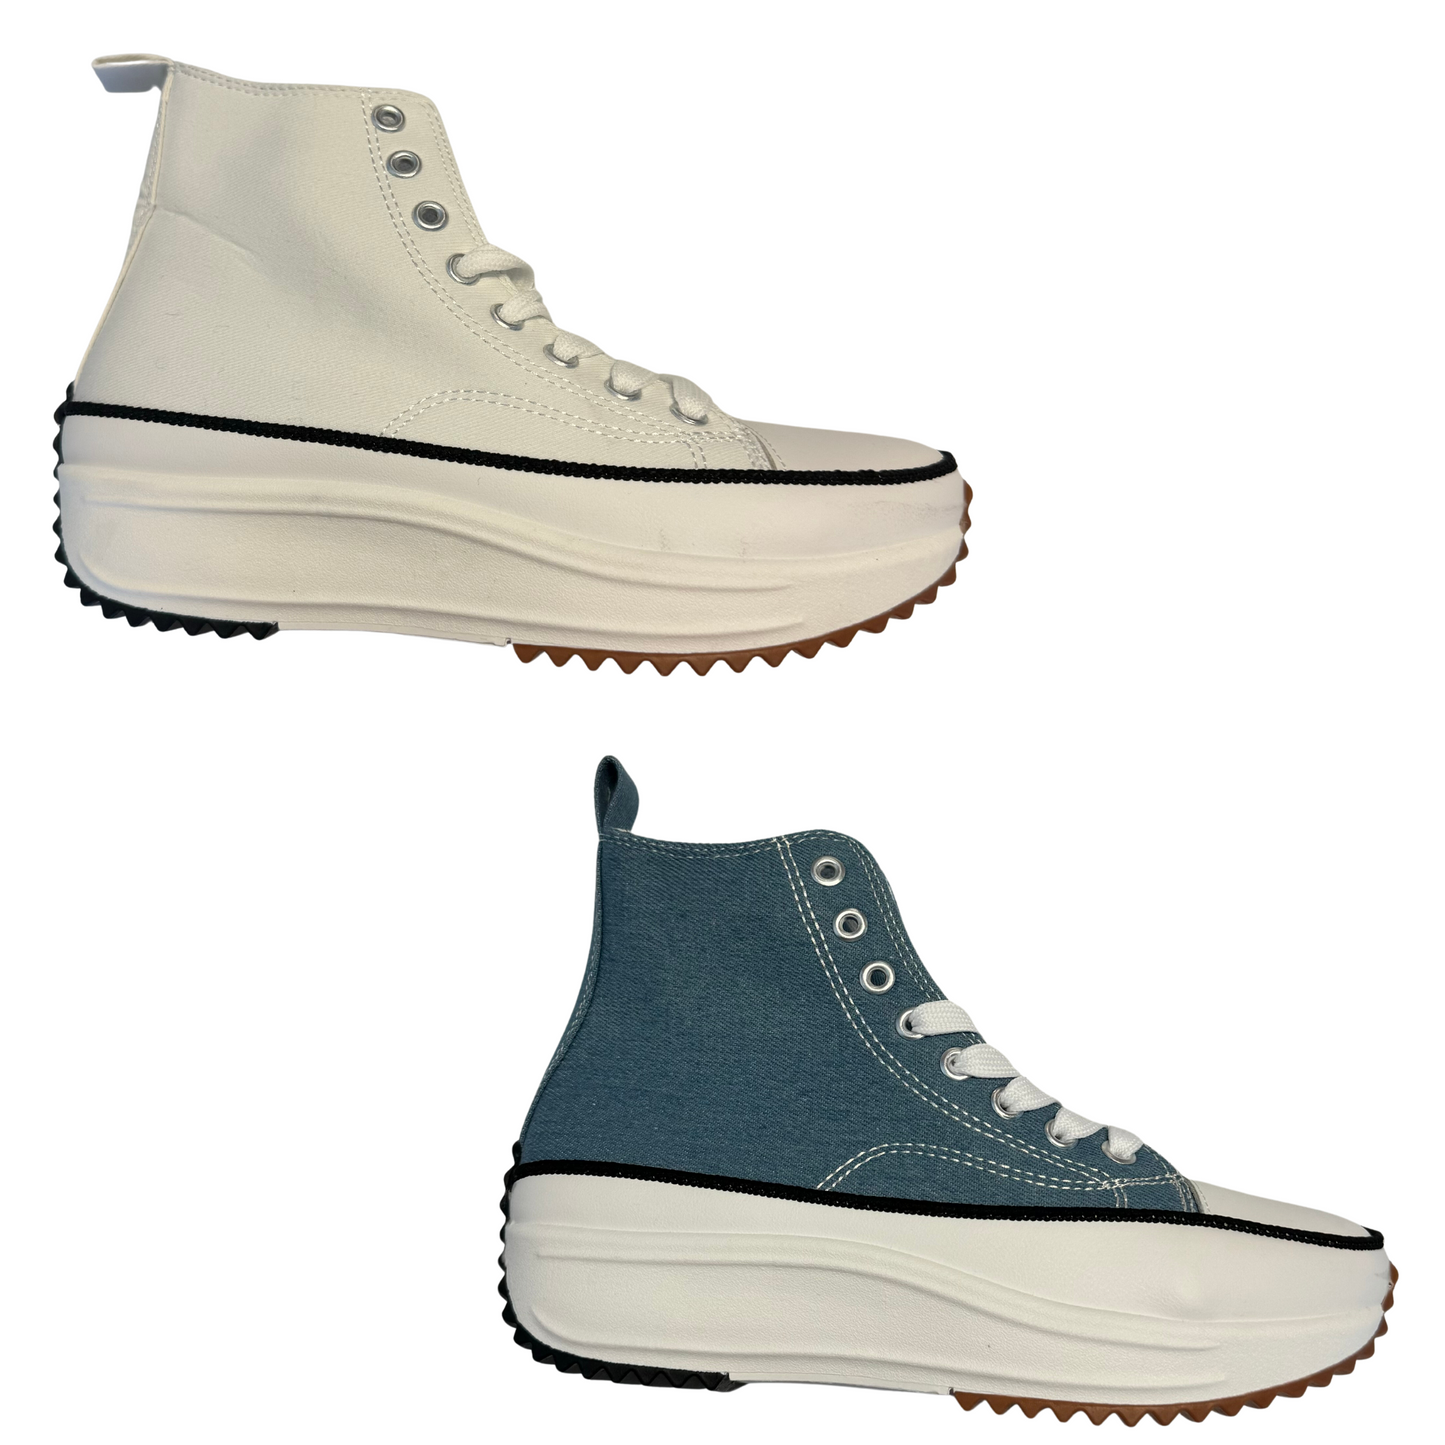 Stay on trend with these stylish High Top Sneakers. Crafted from lightweight materials in either a classic white or denim blue color, these sneakers are sure to make a statement.